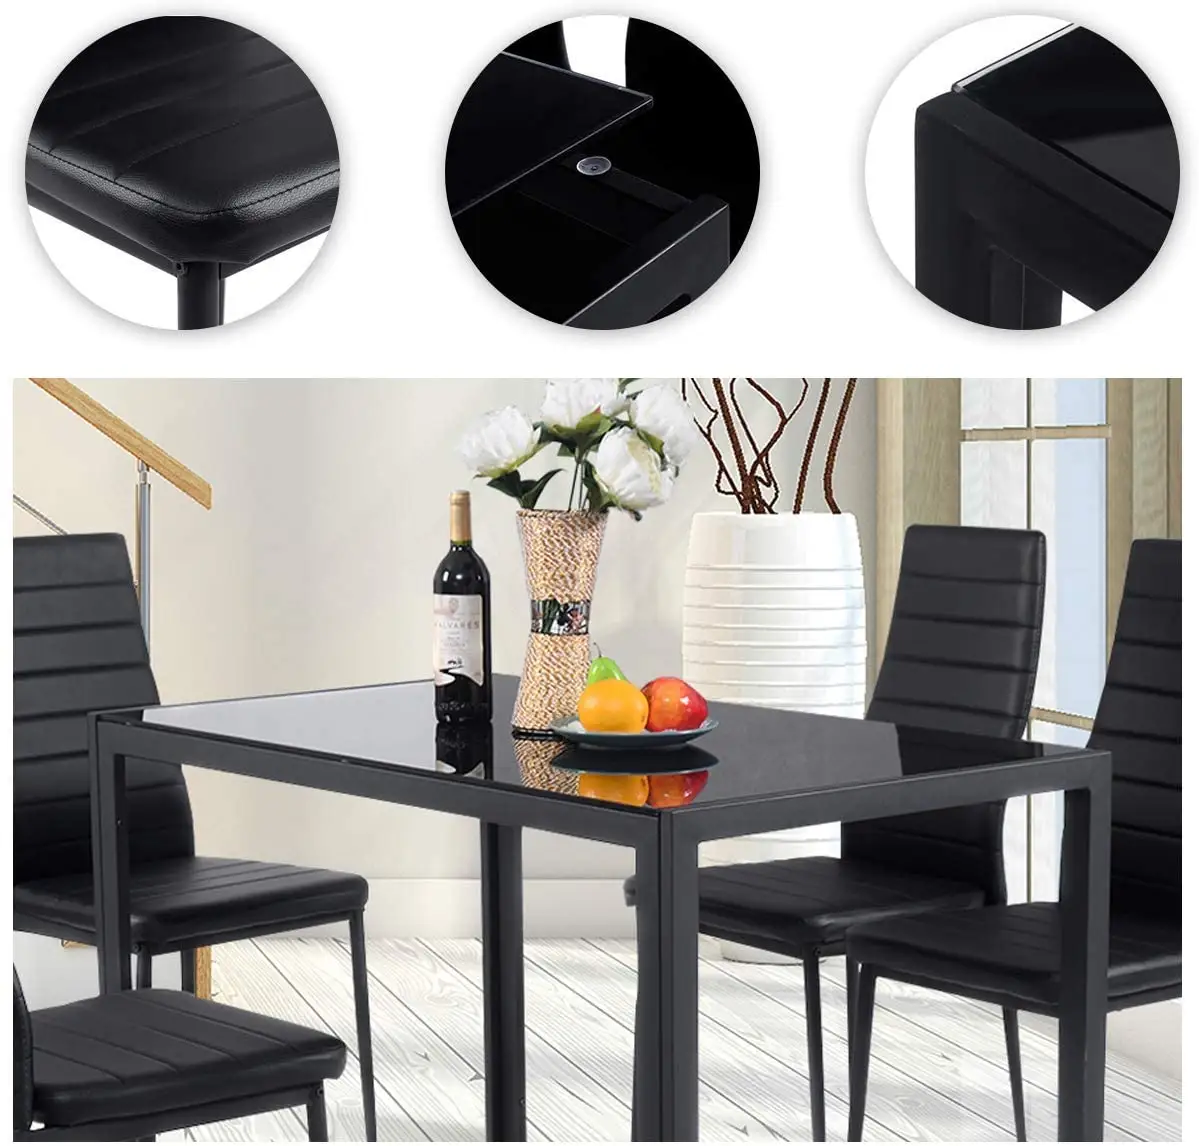 Simple And Useful Modern Style Tempered Glass Top With Metal Leg Dining Table With 4 Chairs Dining Table Set